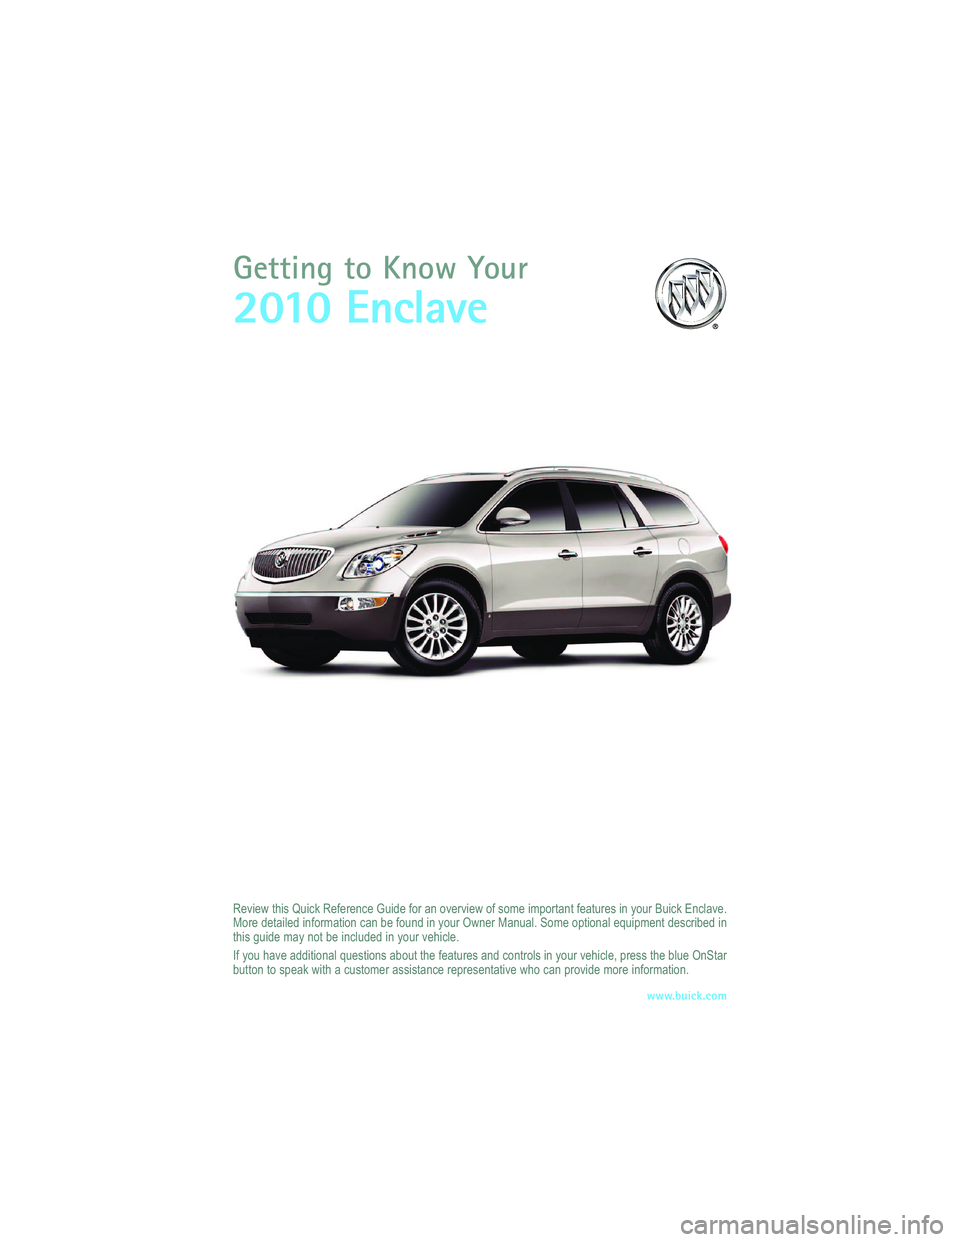 BUICK ENCLAVE 2010  Get To Know Guide 
  ! "  "	  "
    "  " " "      ! " "    "  "    " "$  "   "    
  "   "    "  "
 " " "$  